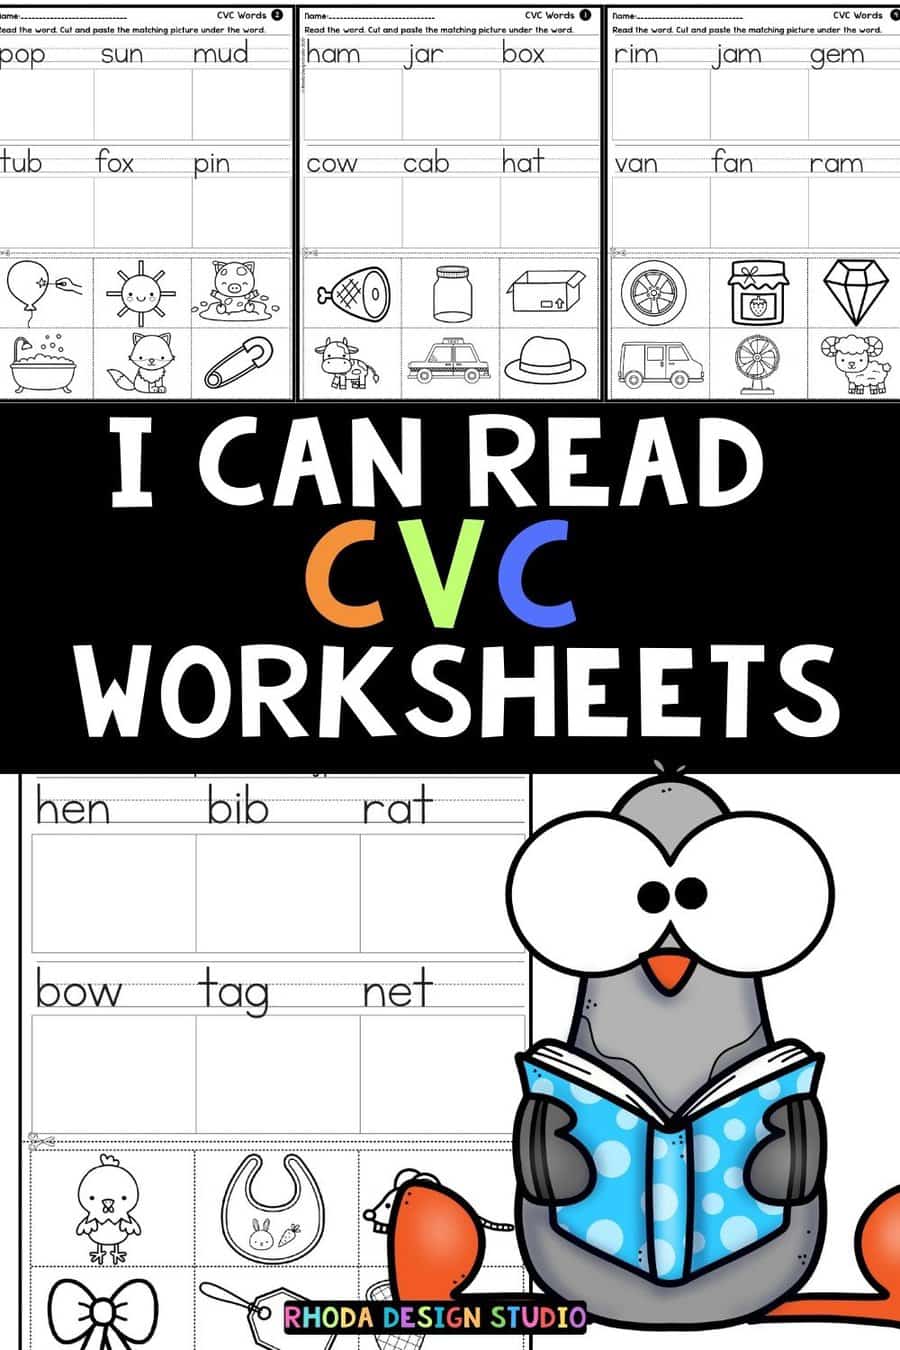 I Can Read CVC Words with Pictures: 10 Free Worksheets